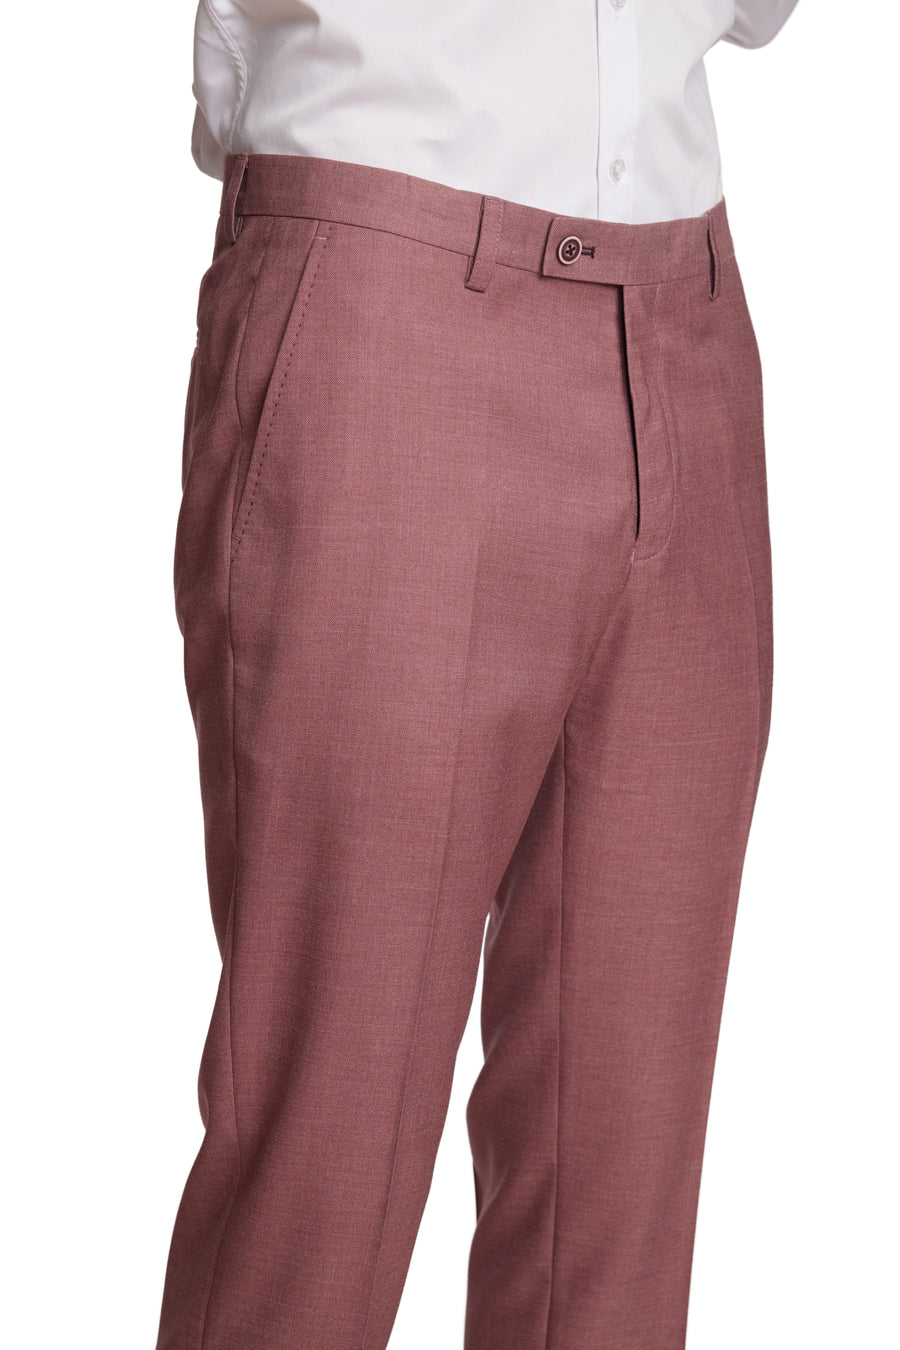 Downing Pants - Dusted Pink